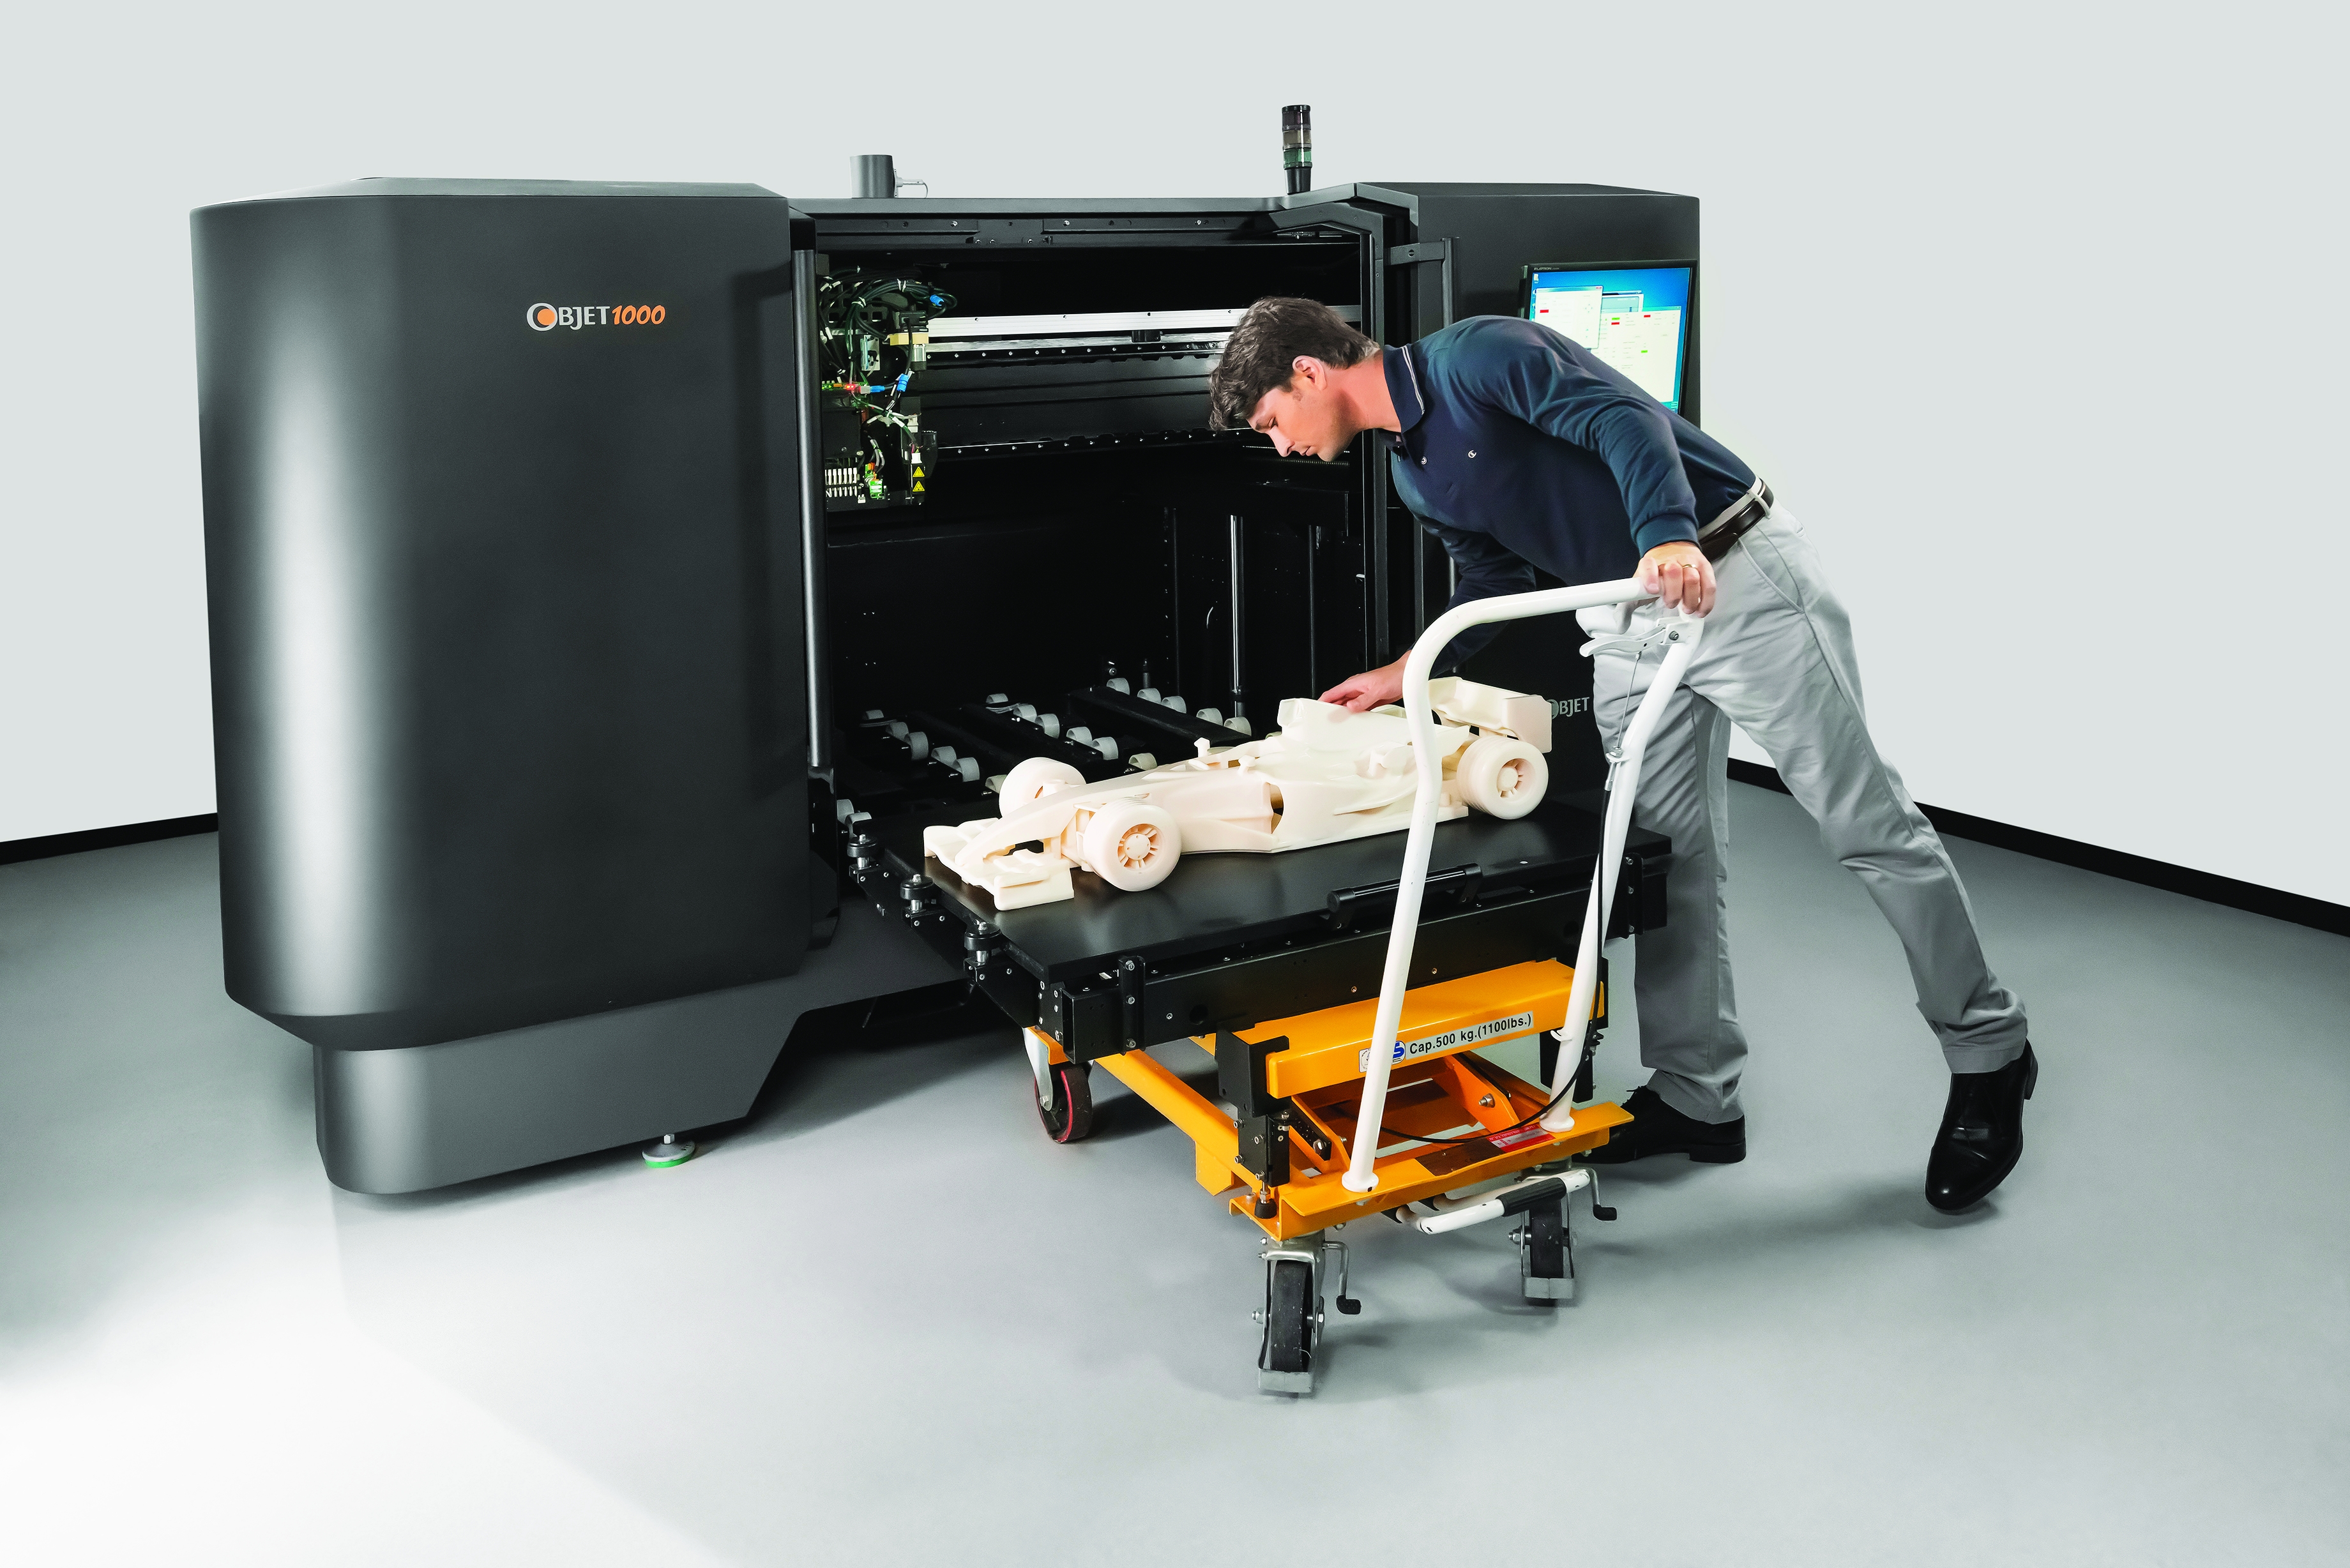 Objet's connex 3D printers are the only commercially available systems able to print multi-materials